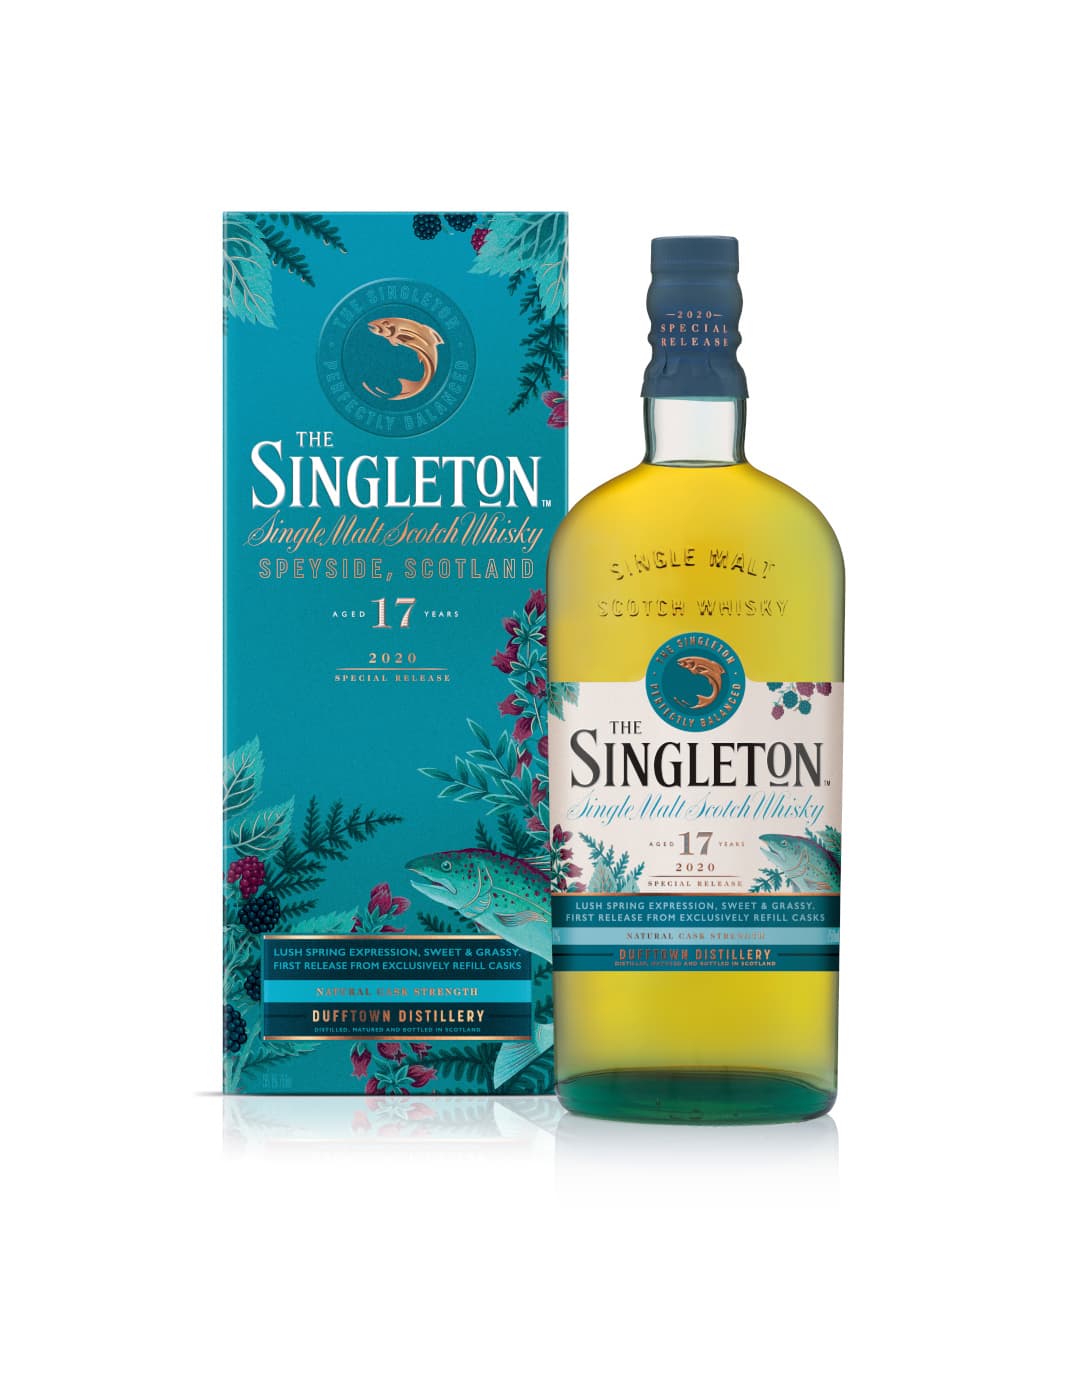 The Singleton of Dufftown 17 Year Old Special Release 2020 Bottle and Box